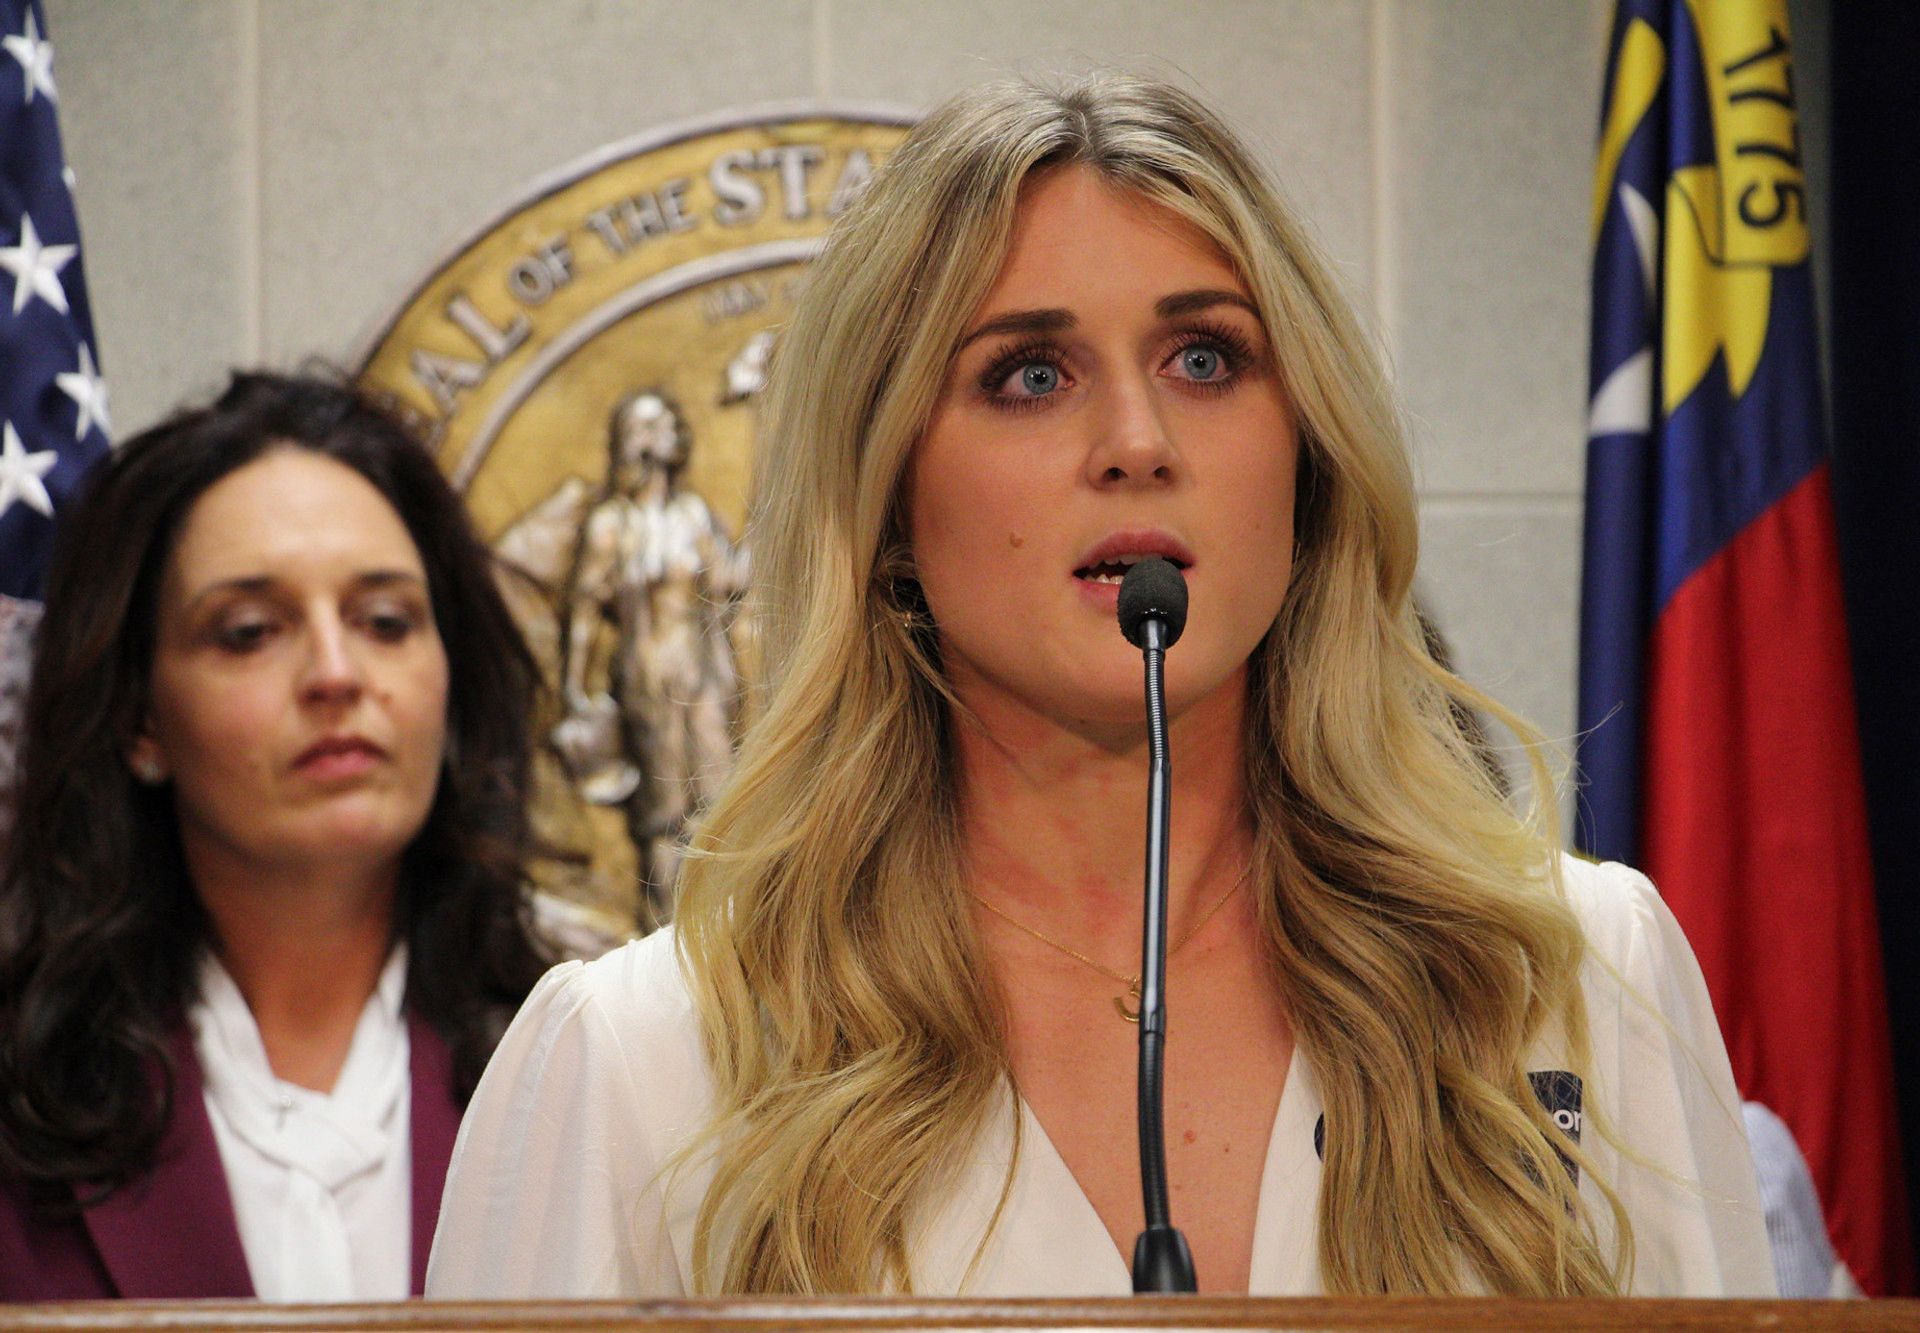 Former collegiate swimmer Riley Gaines speaks at a news conference about transgender inclusion in sports at the North Carolina Legislative Building